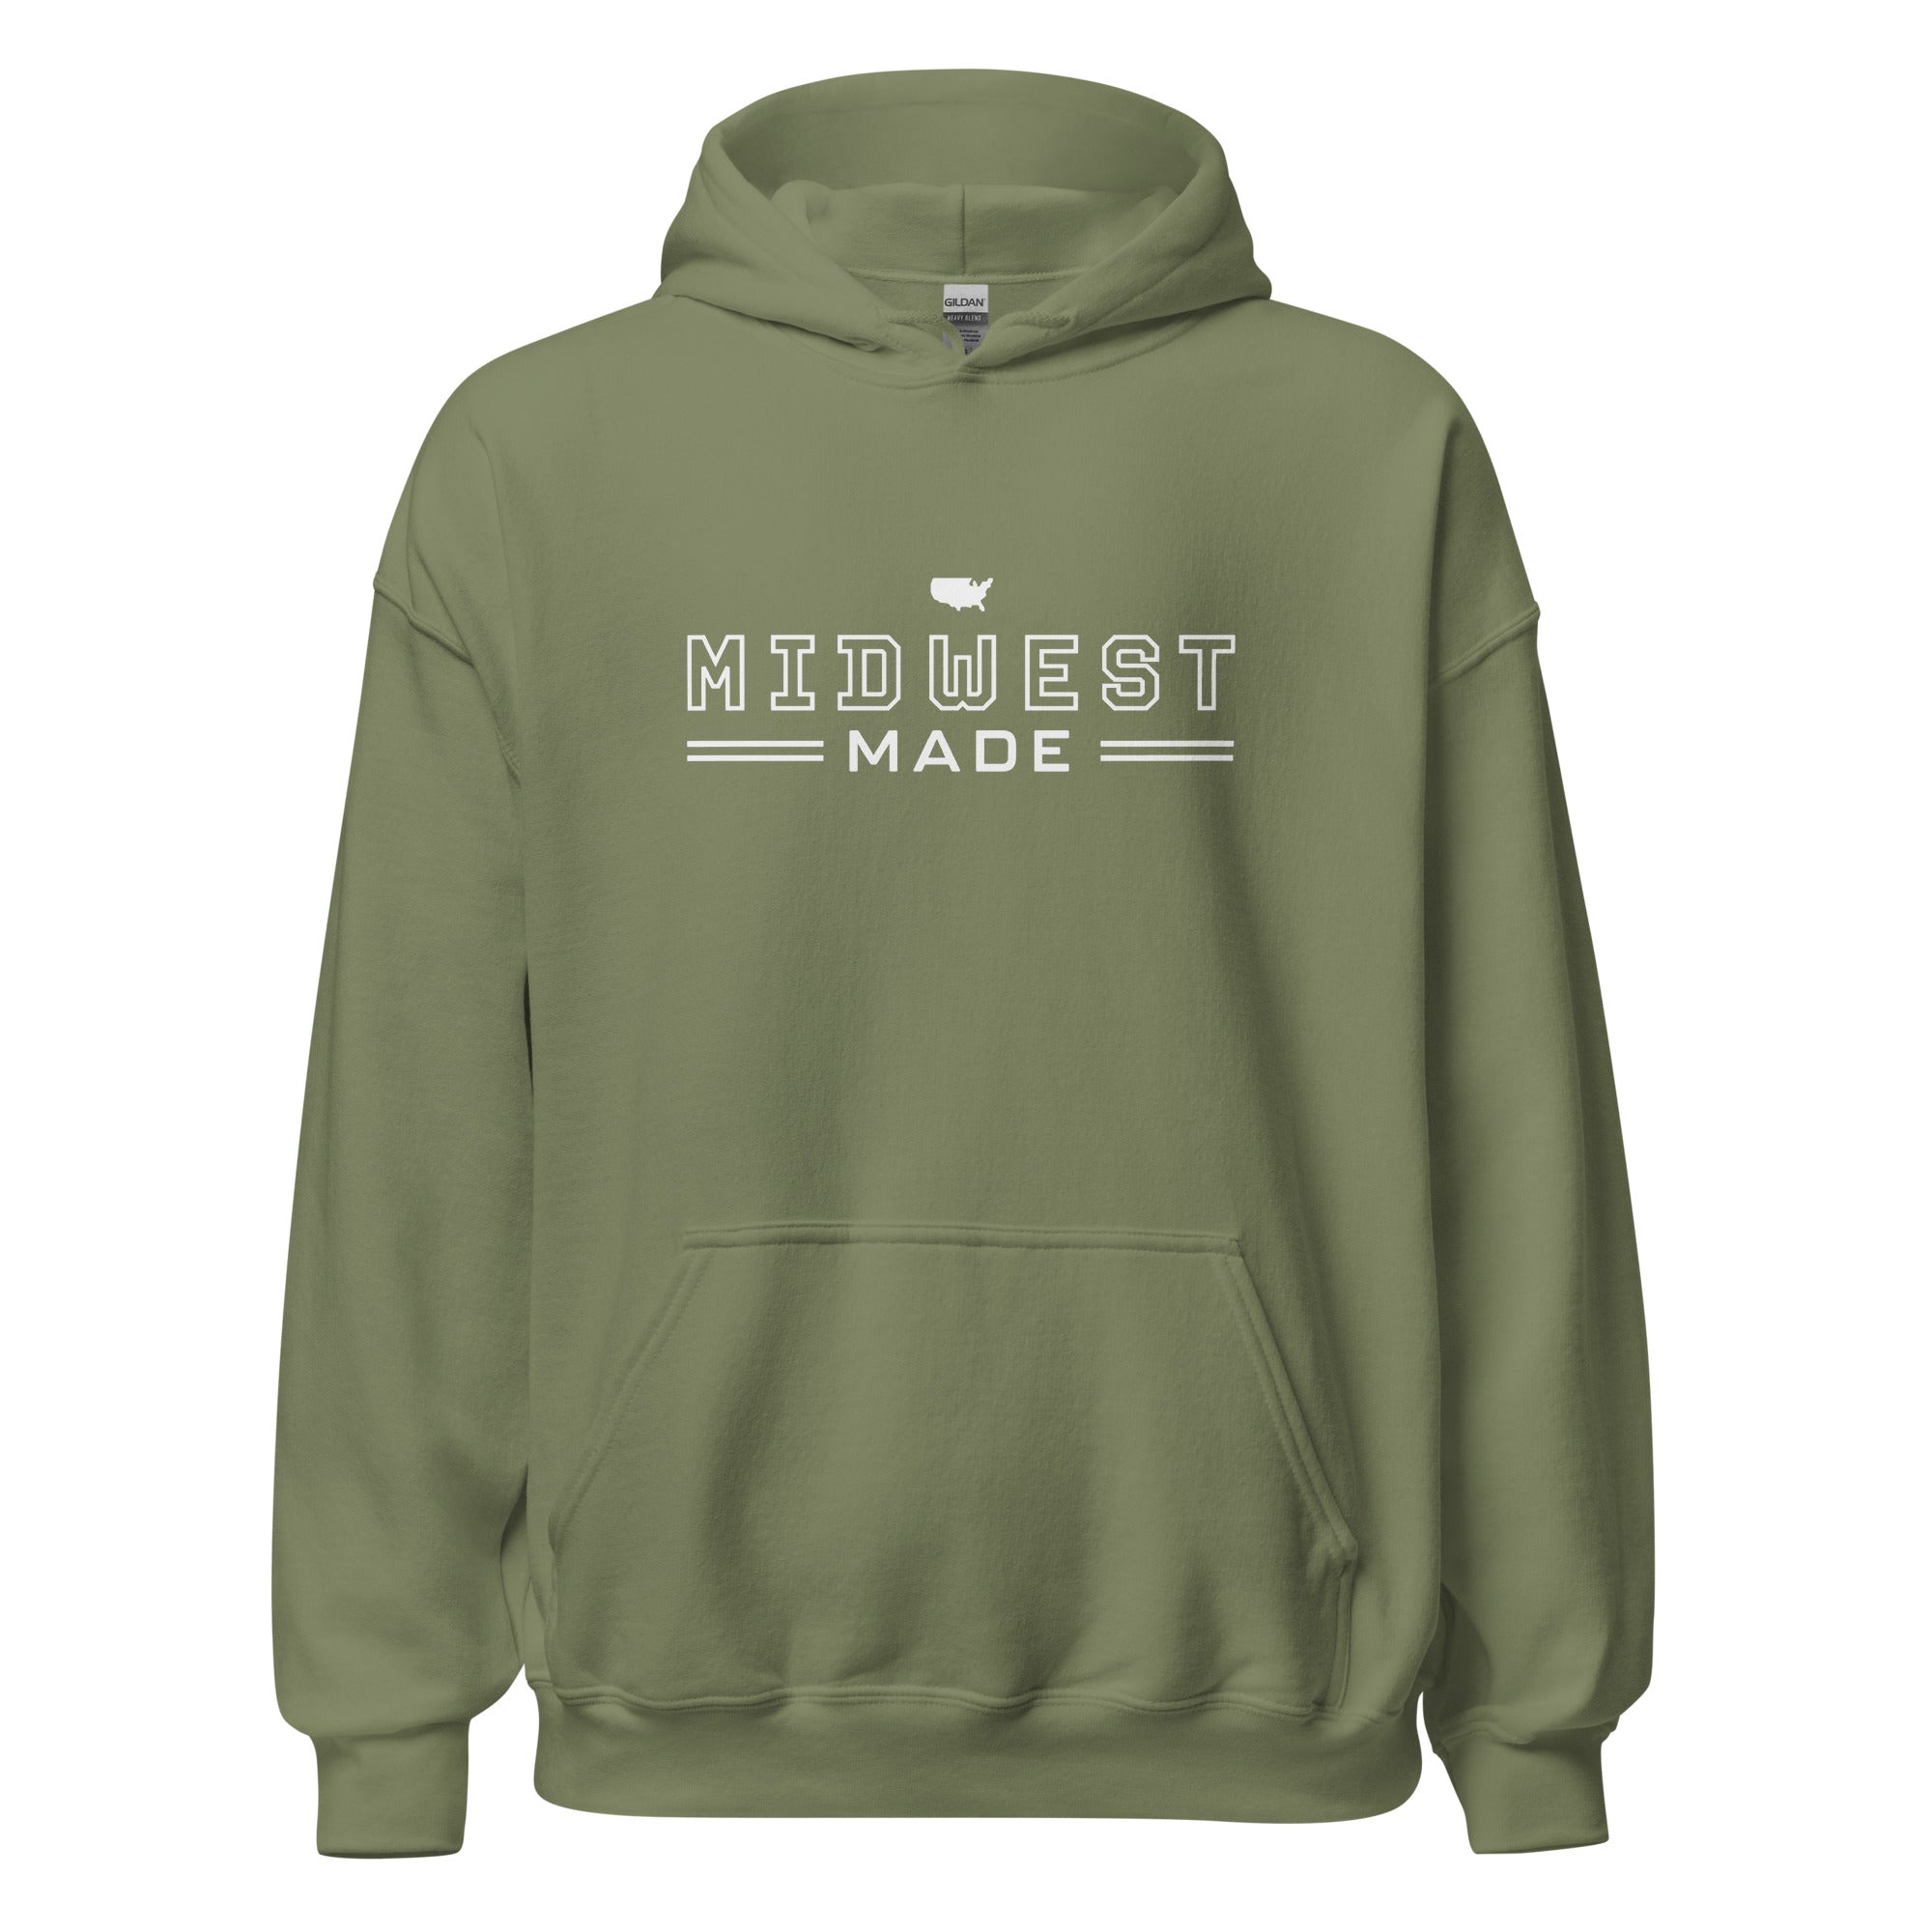 unisex-heavy-blend-hoodie-military-green-front-6512085a5af54.jpg